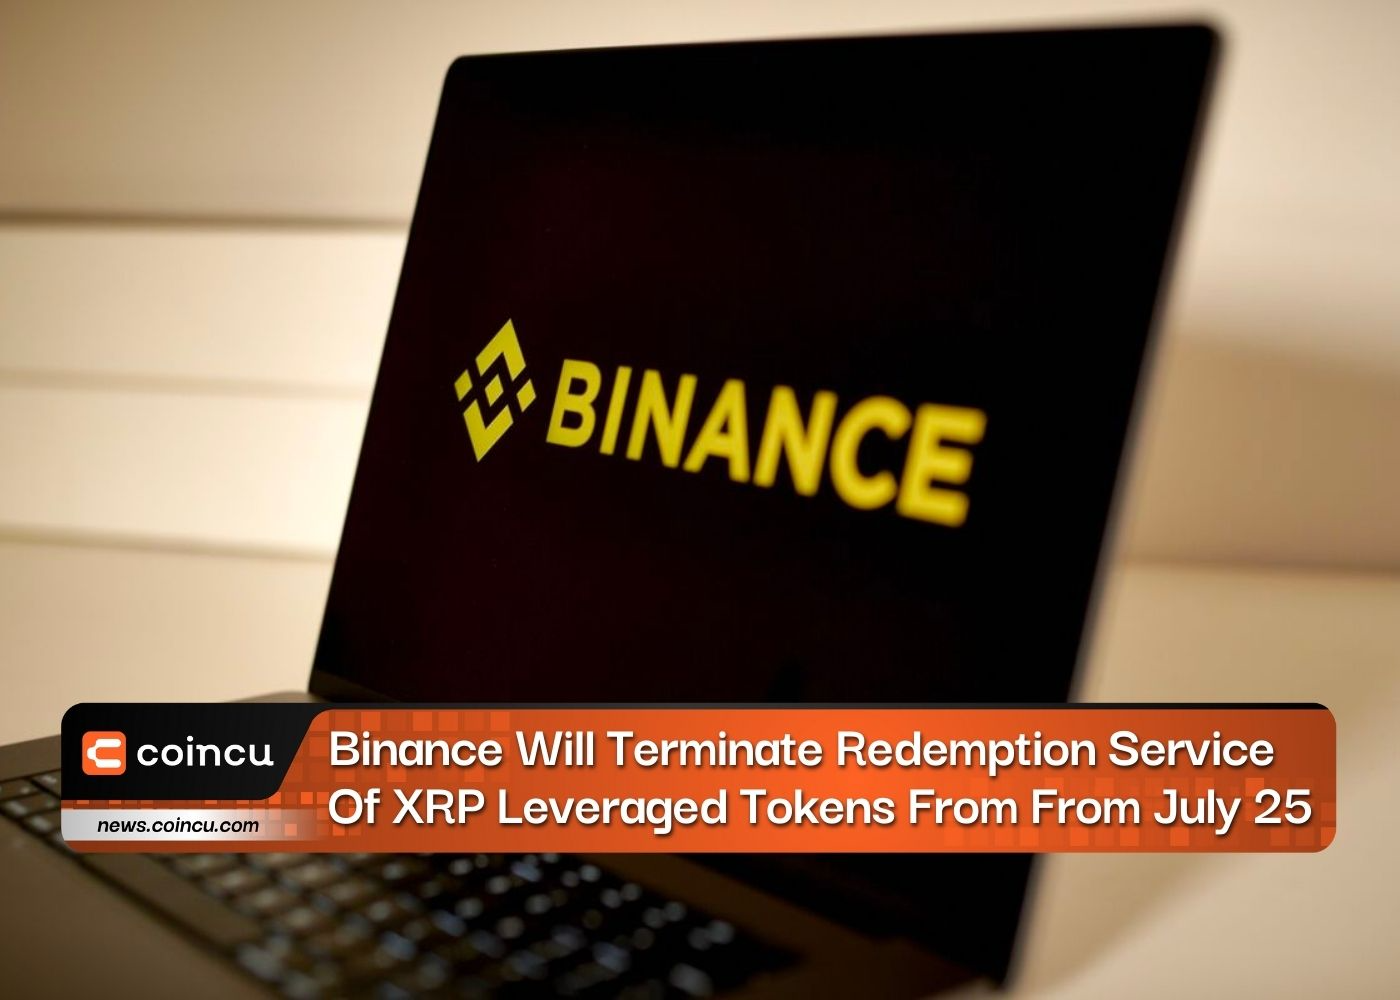 Binance Will Terminate Redemption Service Of XRP Leveraged Tokens From From July 25